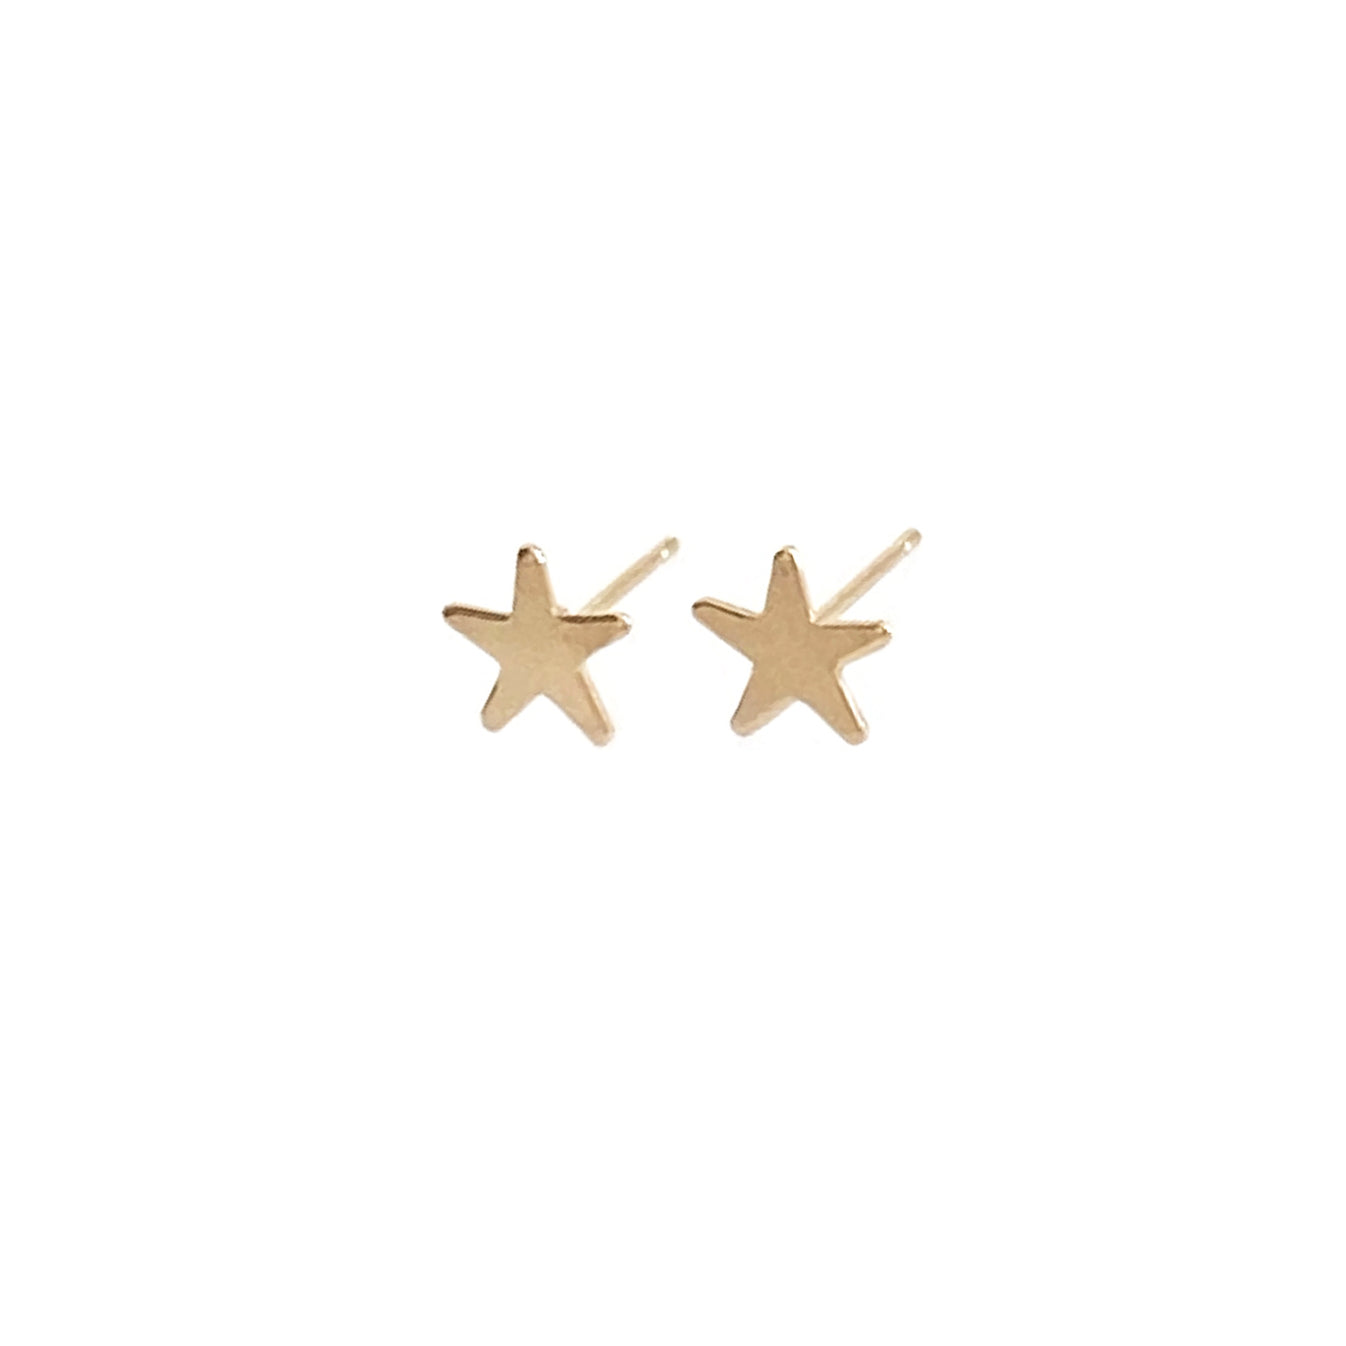 14k gold star stud earrings for everyday earrings. It's great to layer with other earrings